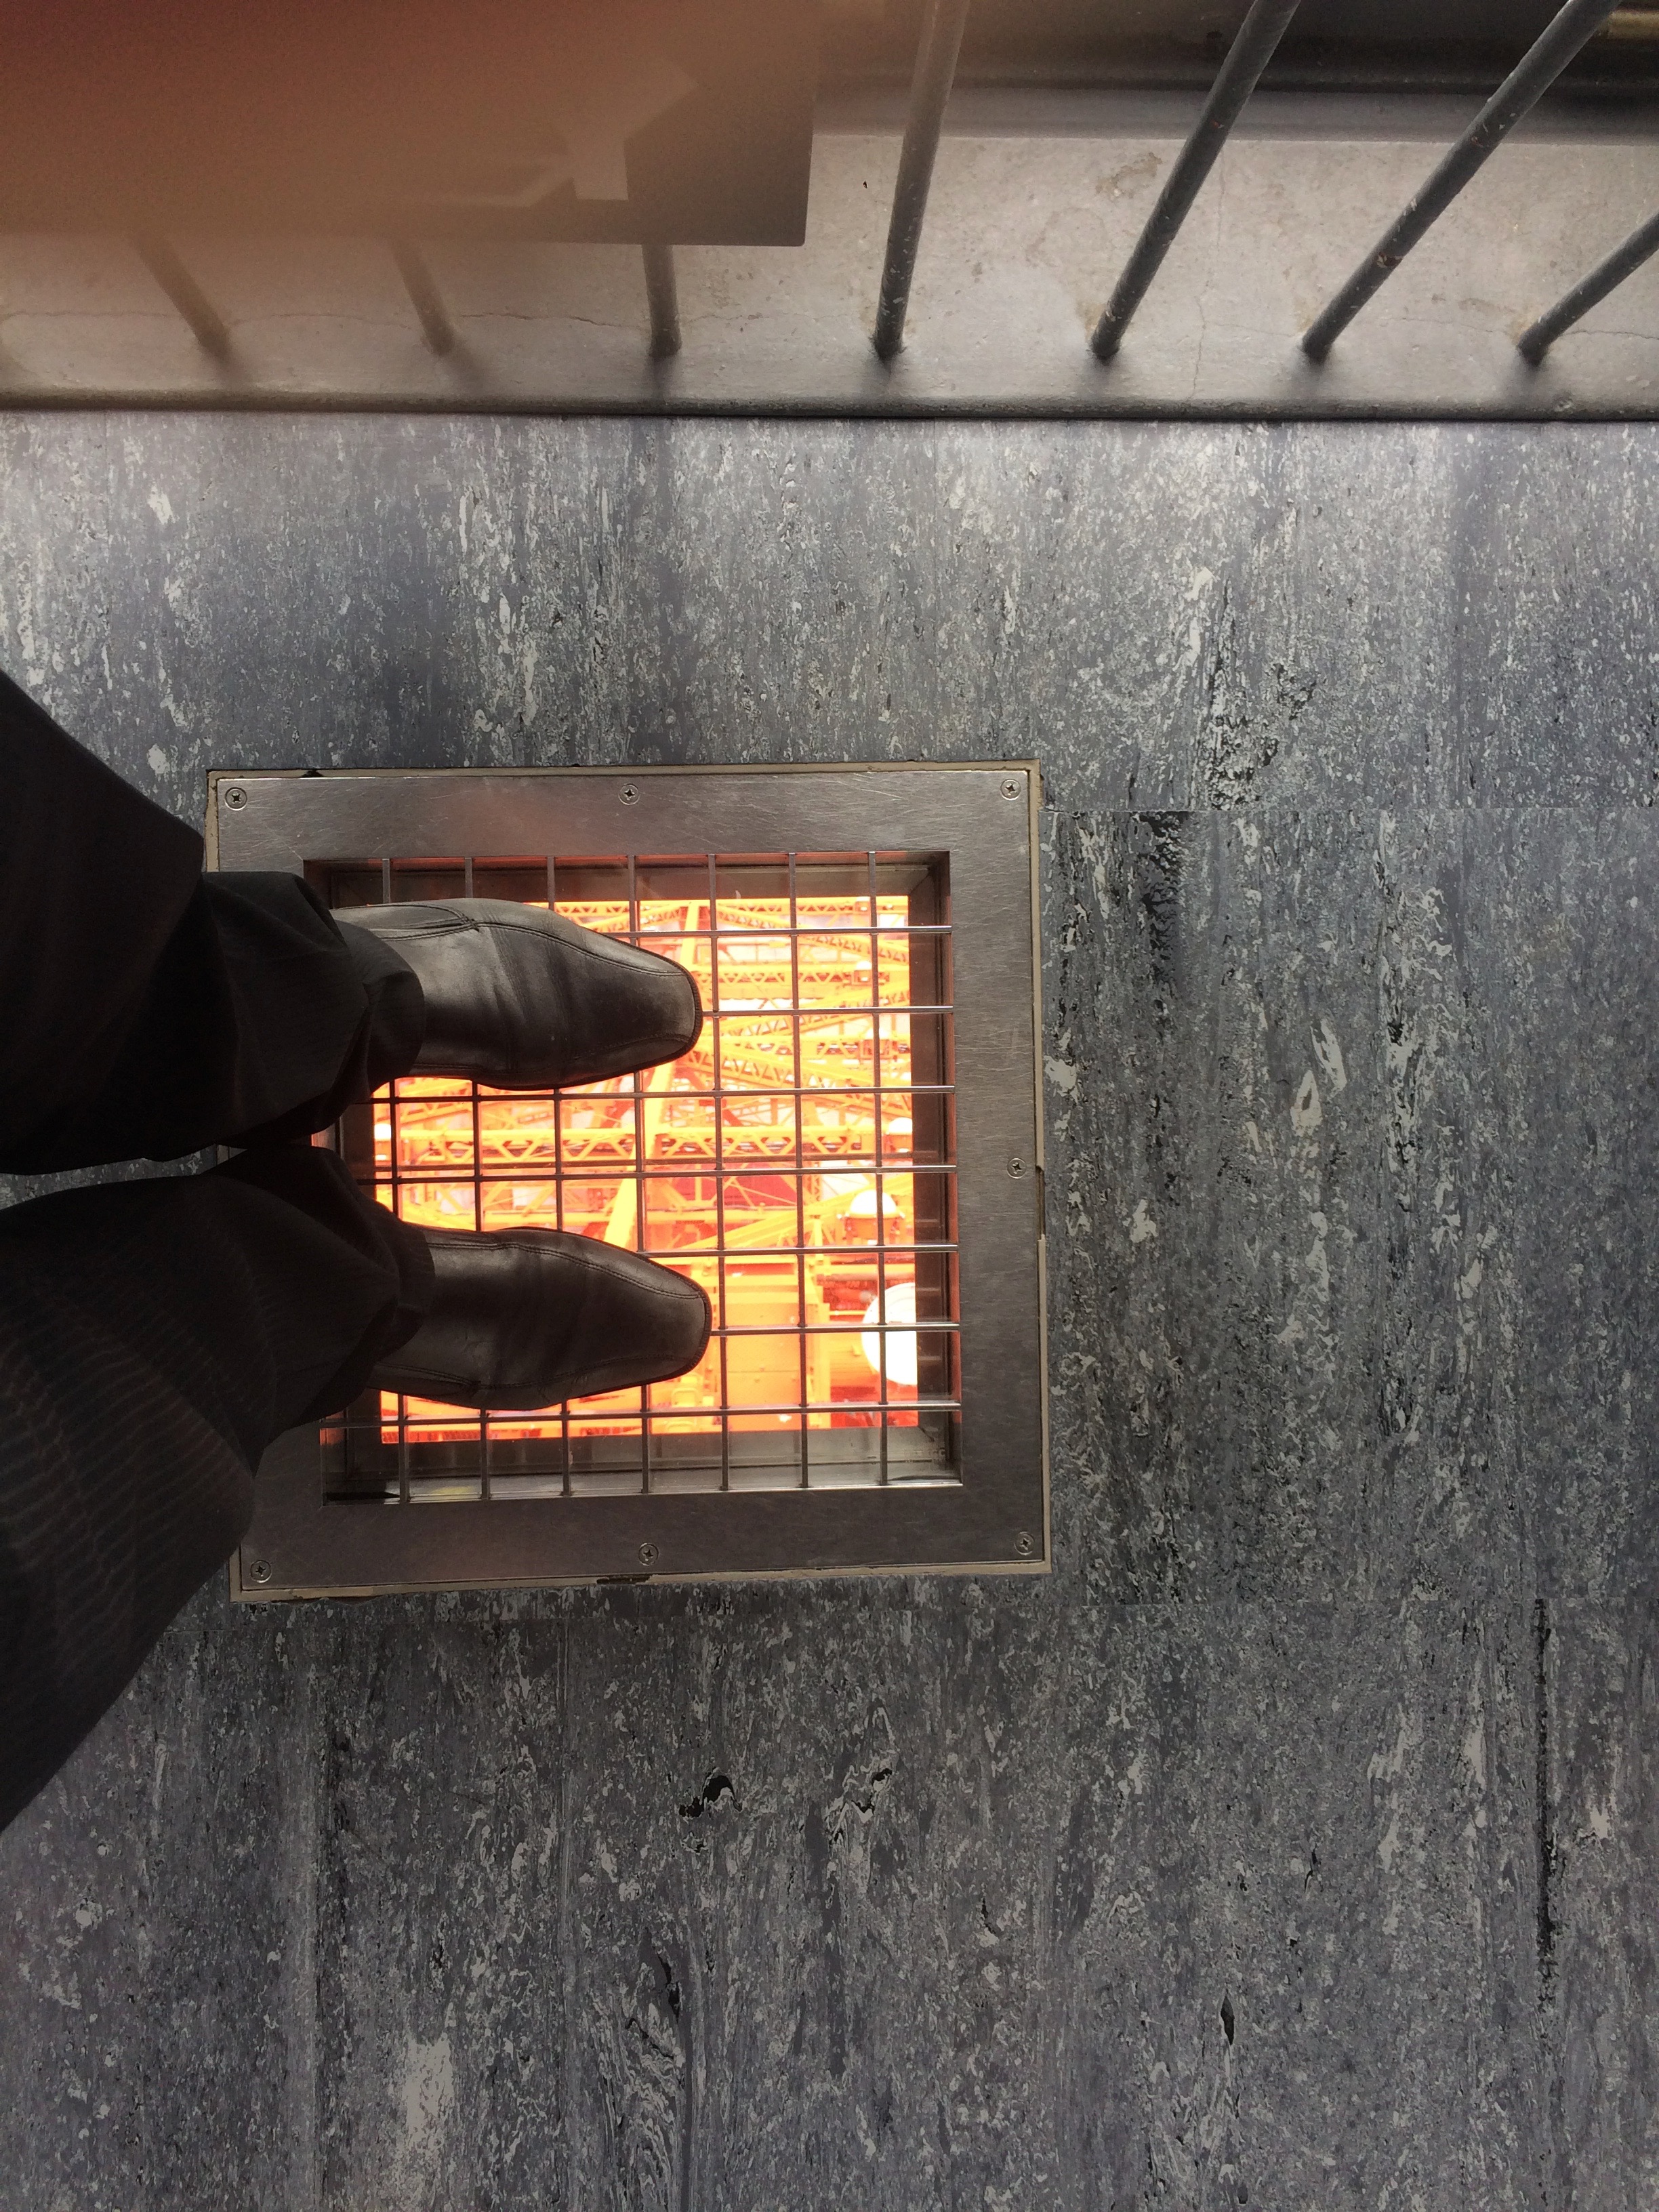 a person's feet in a metal grate with fire